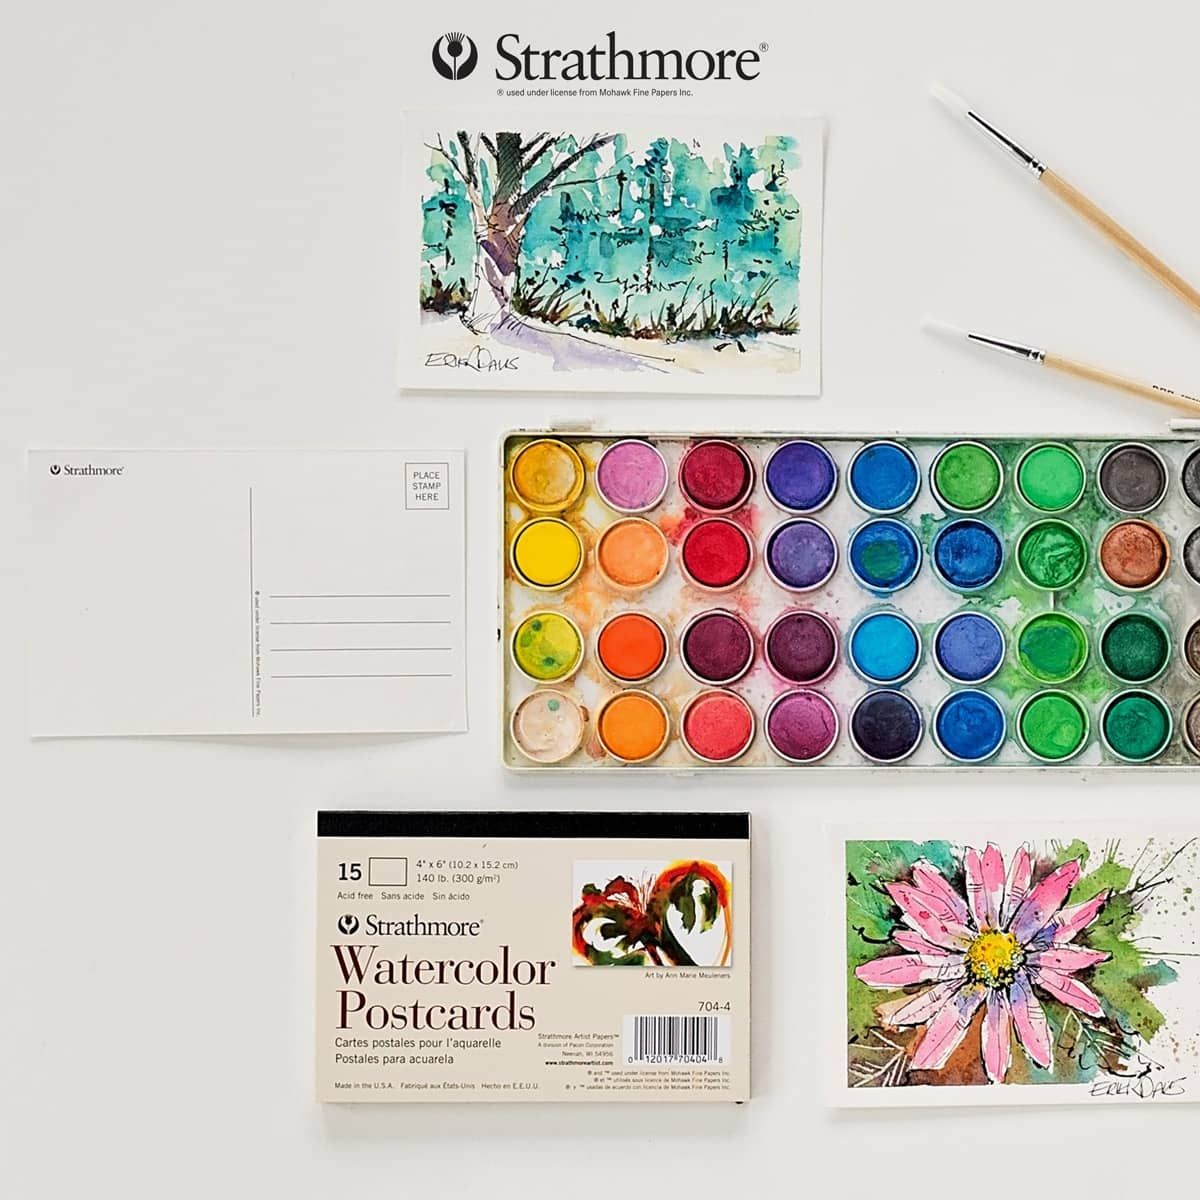 Strathmore 400 Artist Watercolor Paper, 140 Lb, 22 X 30 Inches, 10